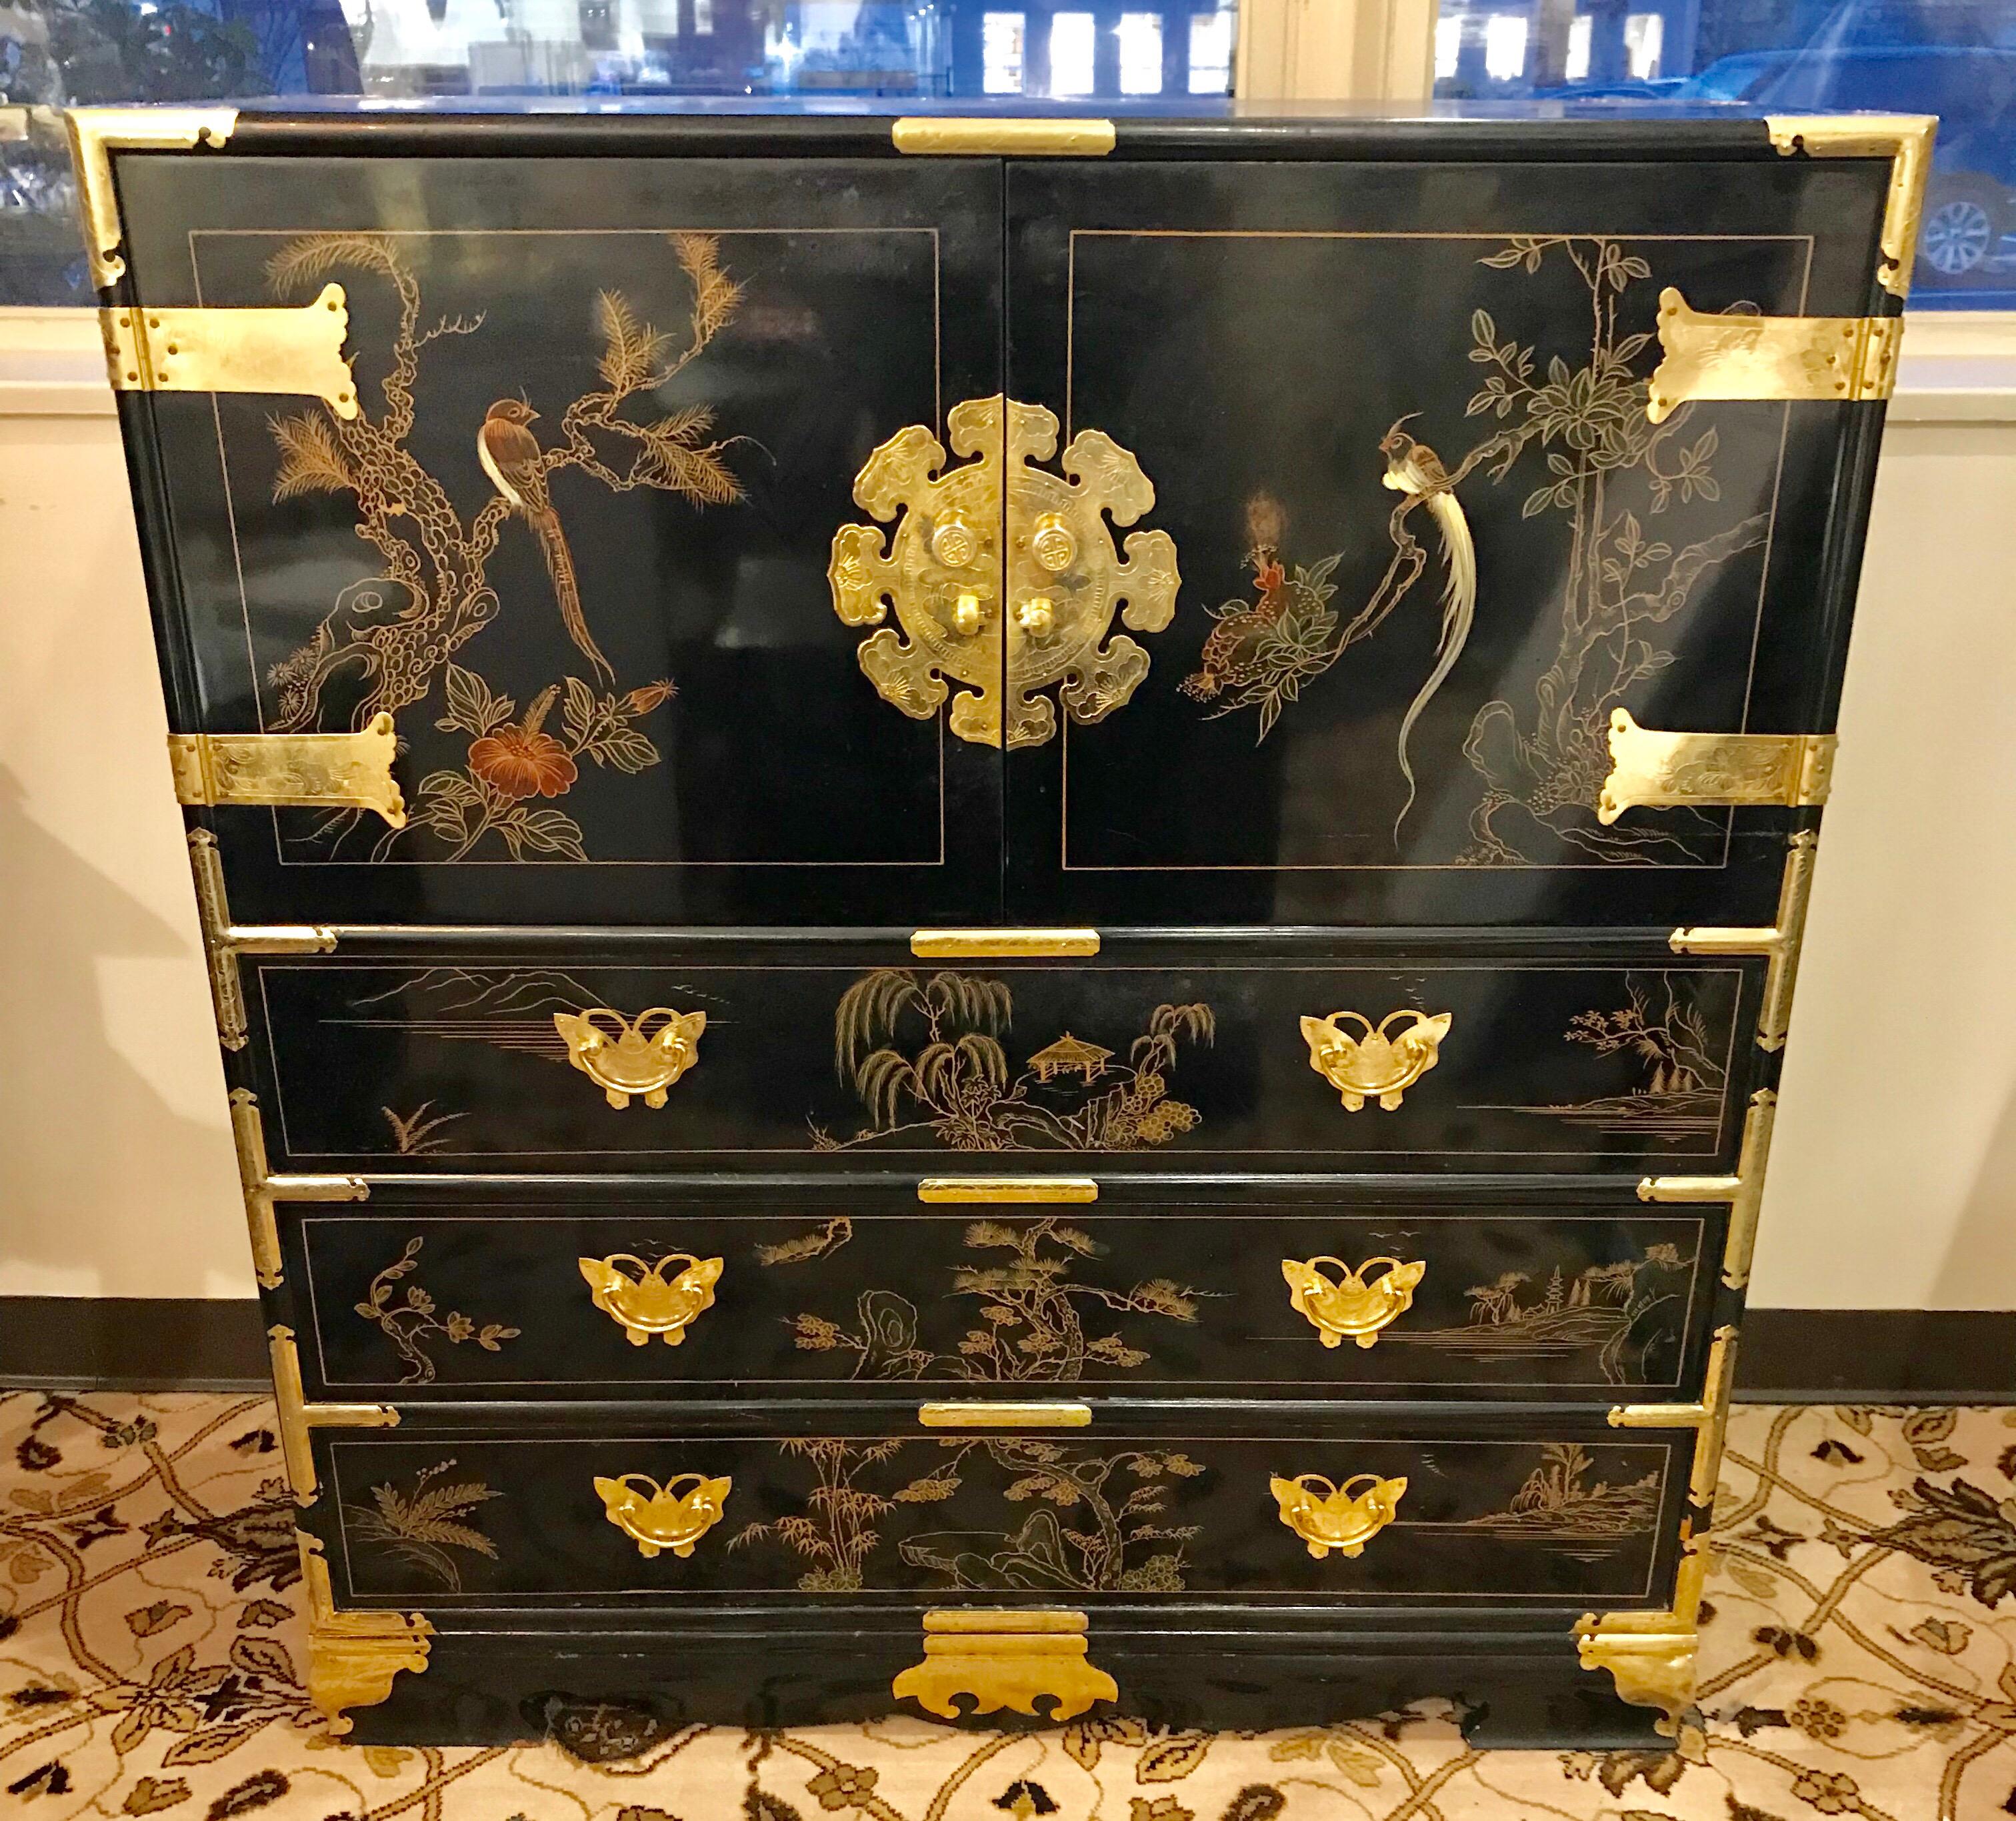 Black lacquer chinoiserie tall chest with hand painted flowers and birds has plenty of storage in its bottom three drawers while top doors open to storage compartment and three smaller drawers  Features ornate incised brass hardware and butterfly